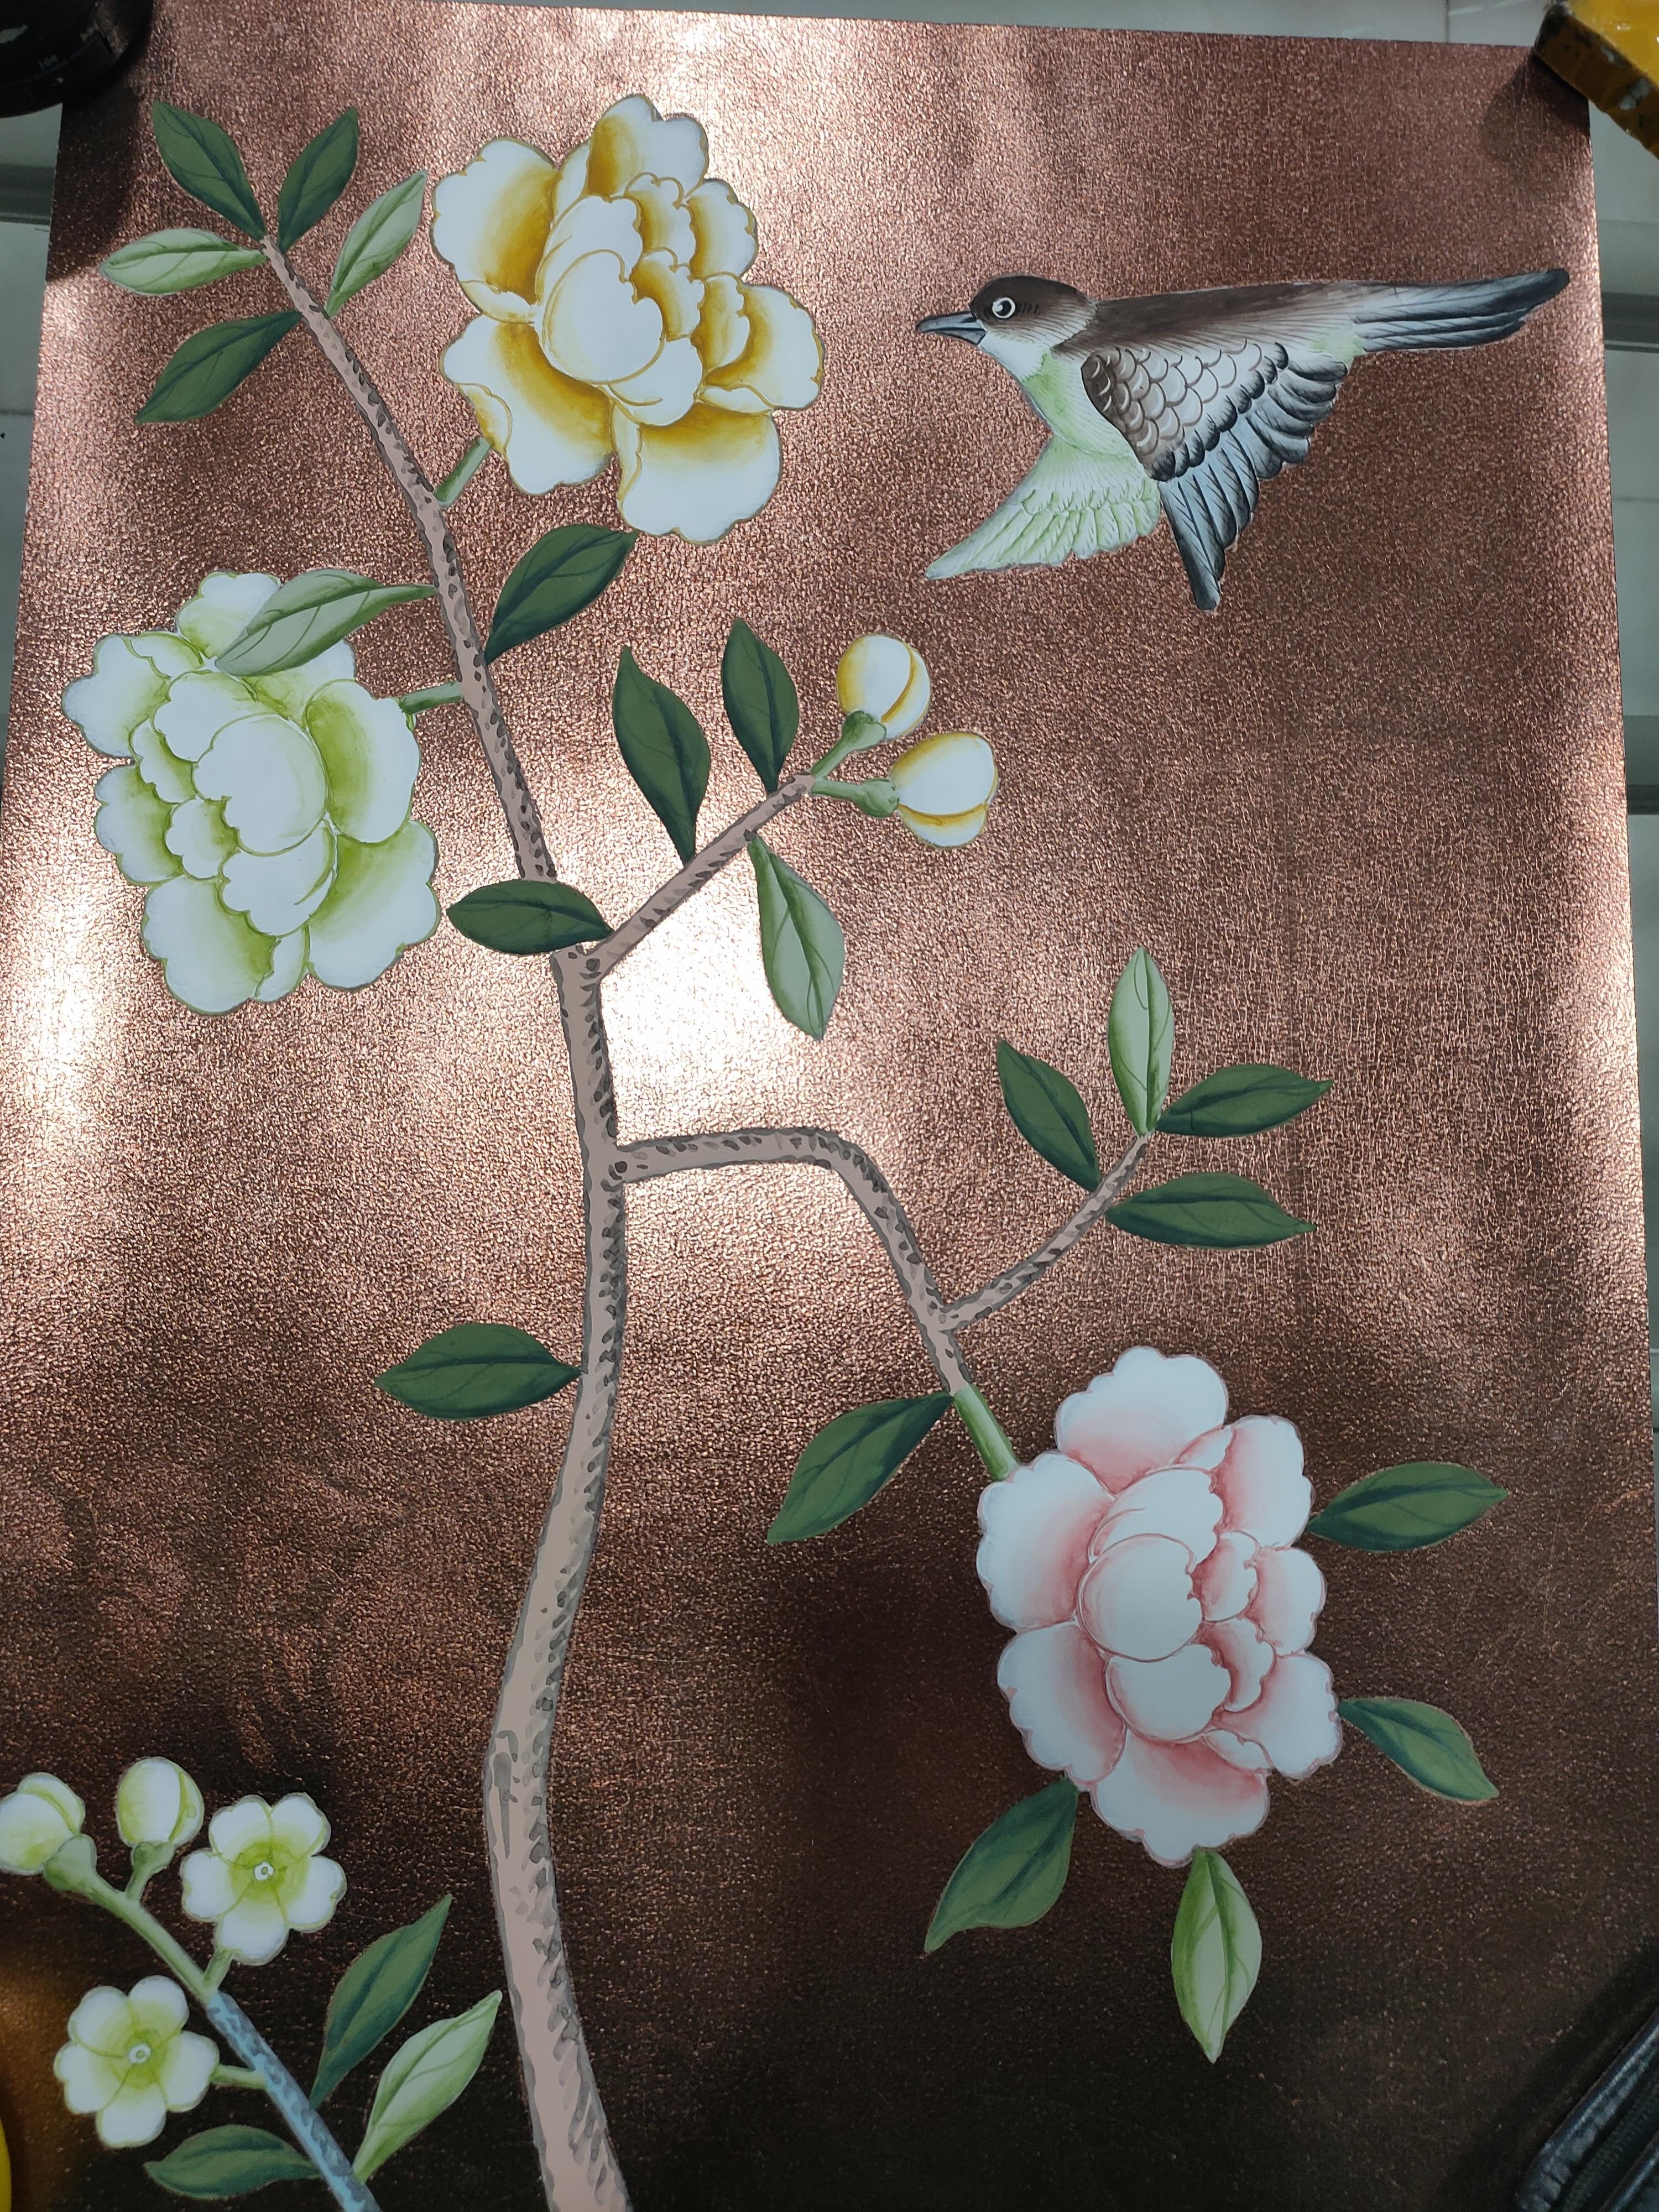 If you love the look of De Gournay wallpaper but not the price, this is for you. Measures: 24.25